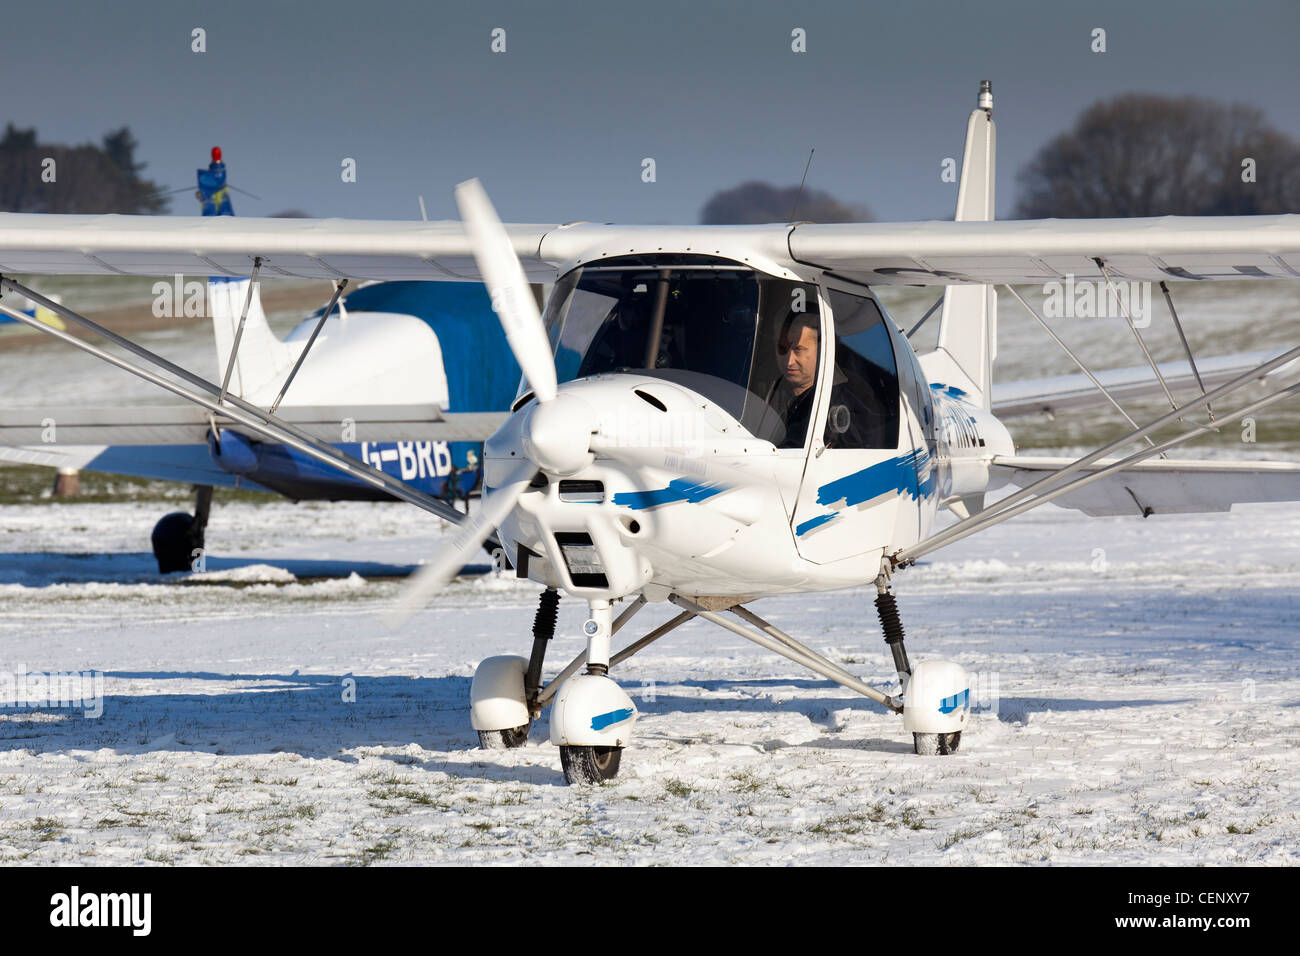 A C42 Ikarus microlight aircraft at Compton Abbas airfield in Dorset in England in snow Stock Photo